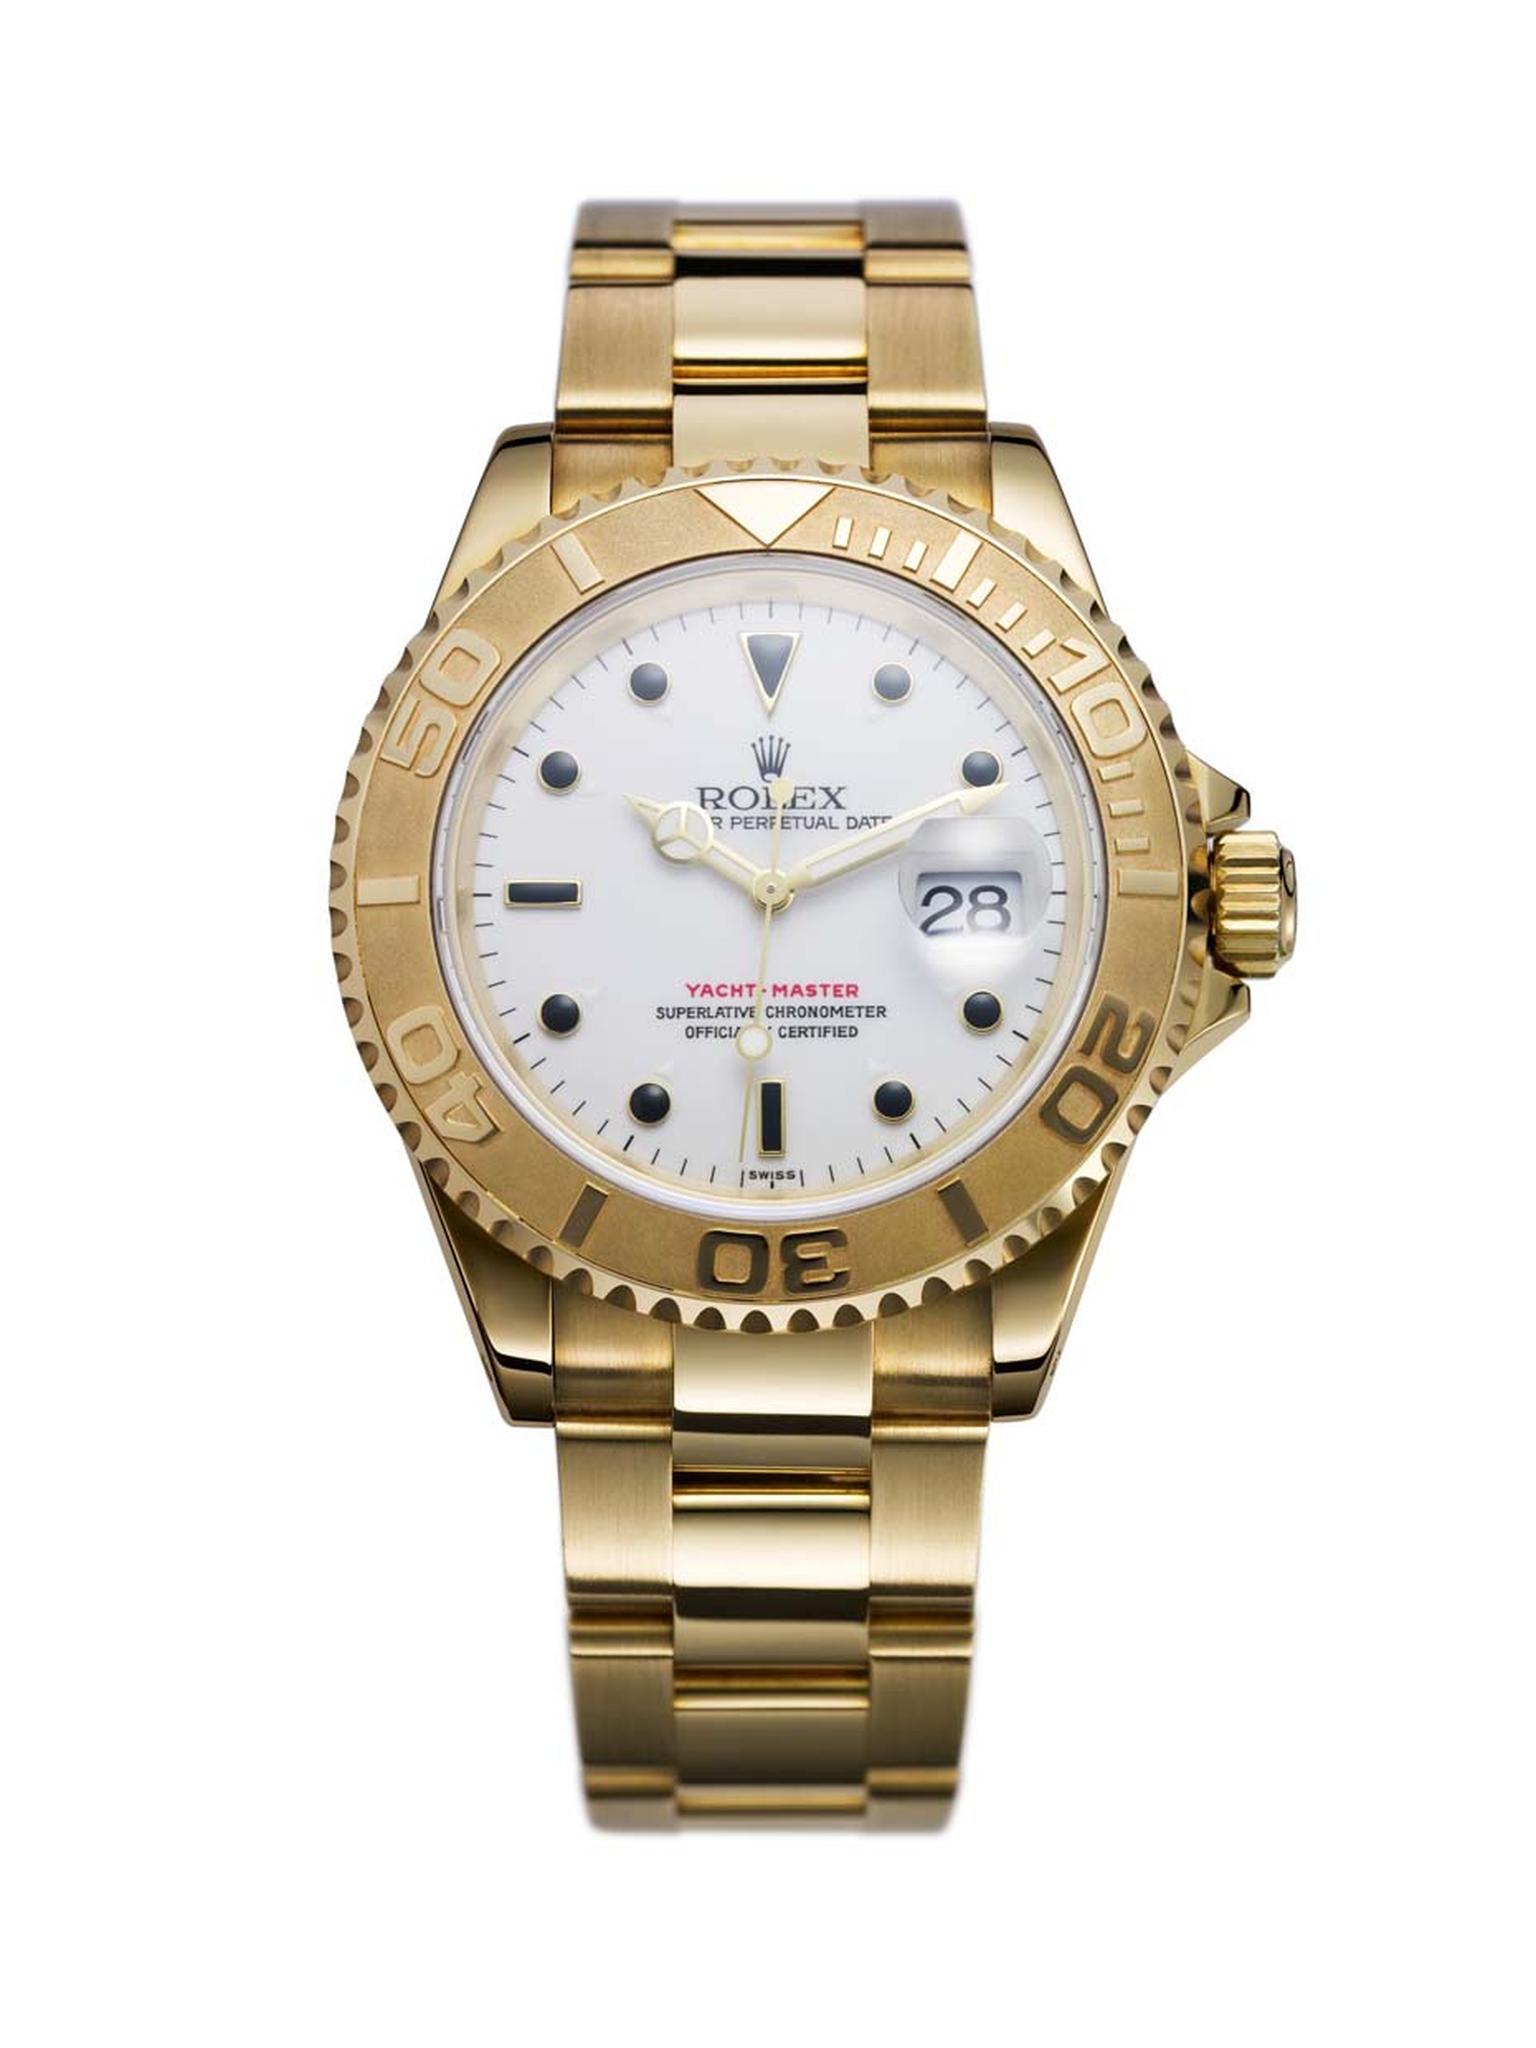 The first member of the Rolex Yacht-Master family, pictured here, was presented in 1992.